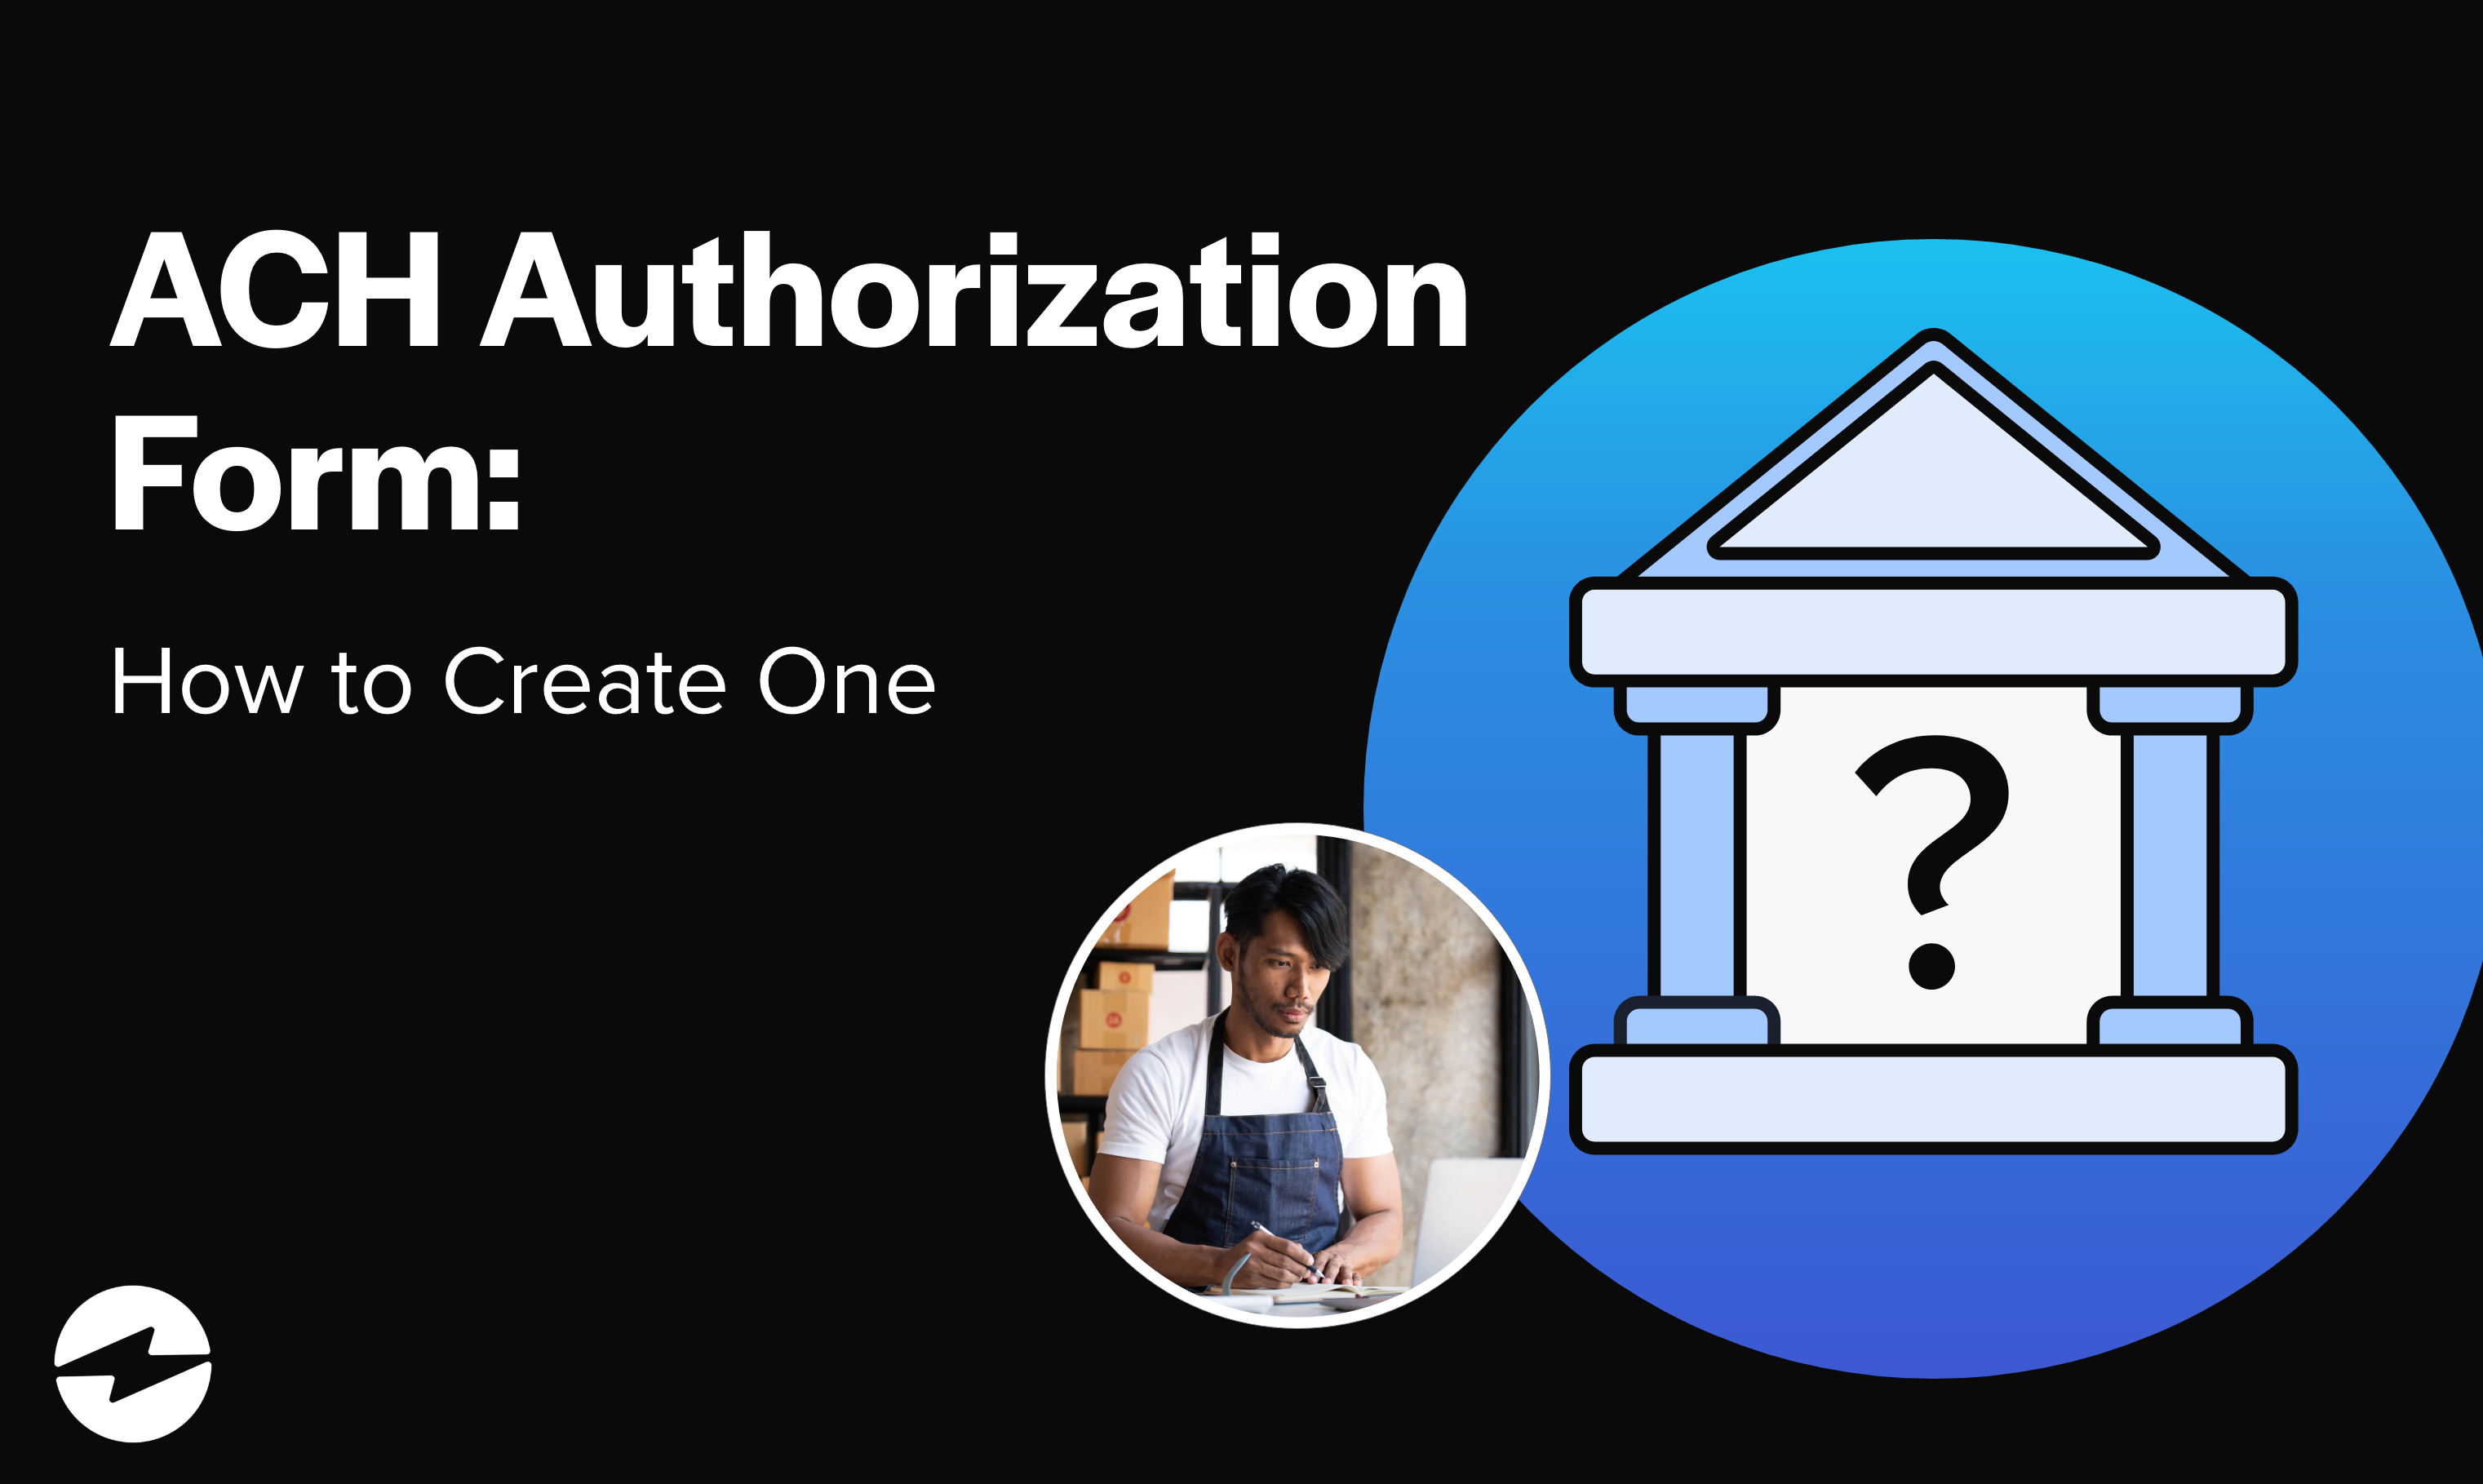 ACH Authorization Form: How to Create One